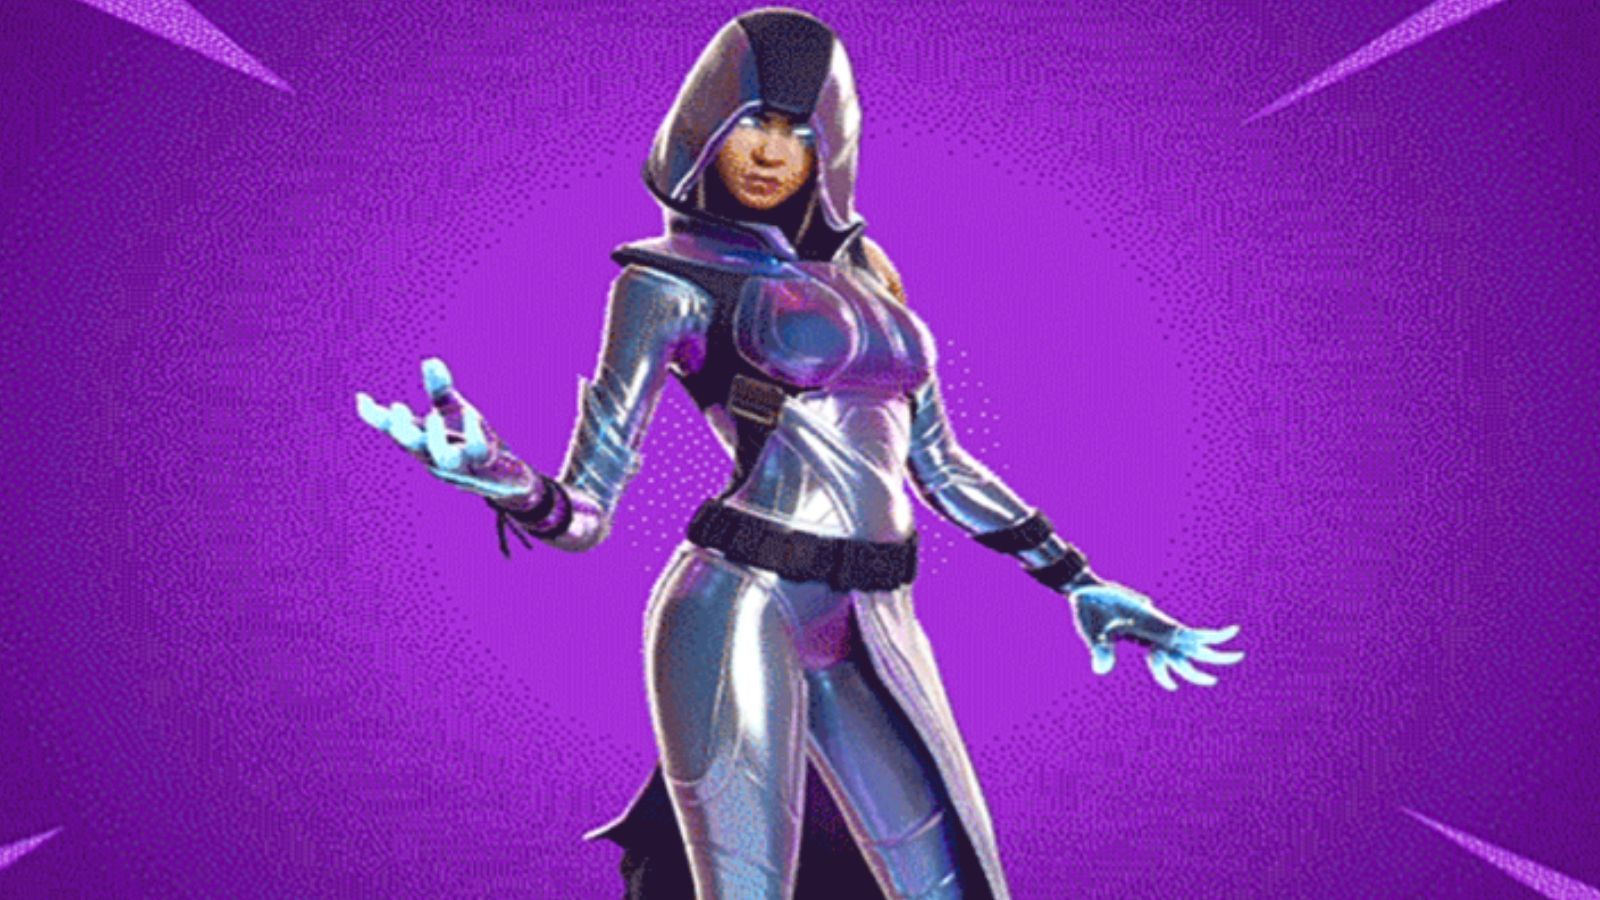 Fortnite' For Android Gets A New Samsung Inspired 'Glow' Skin